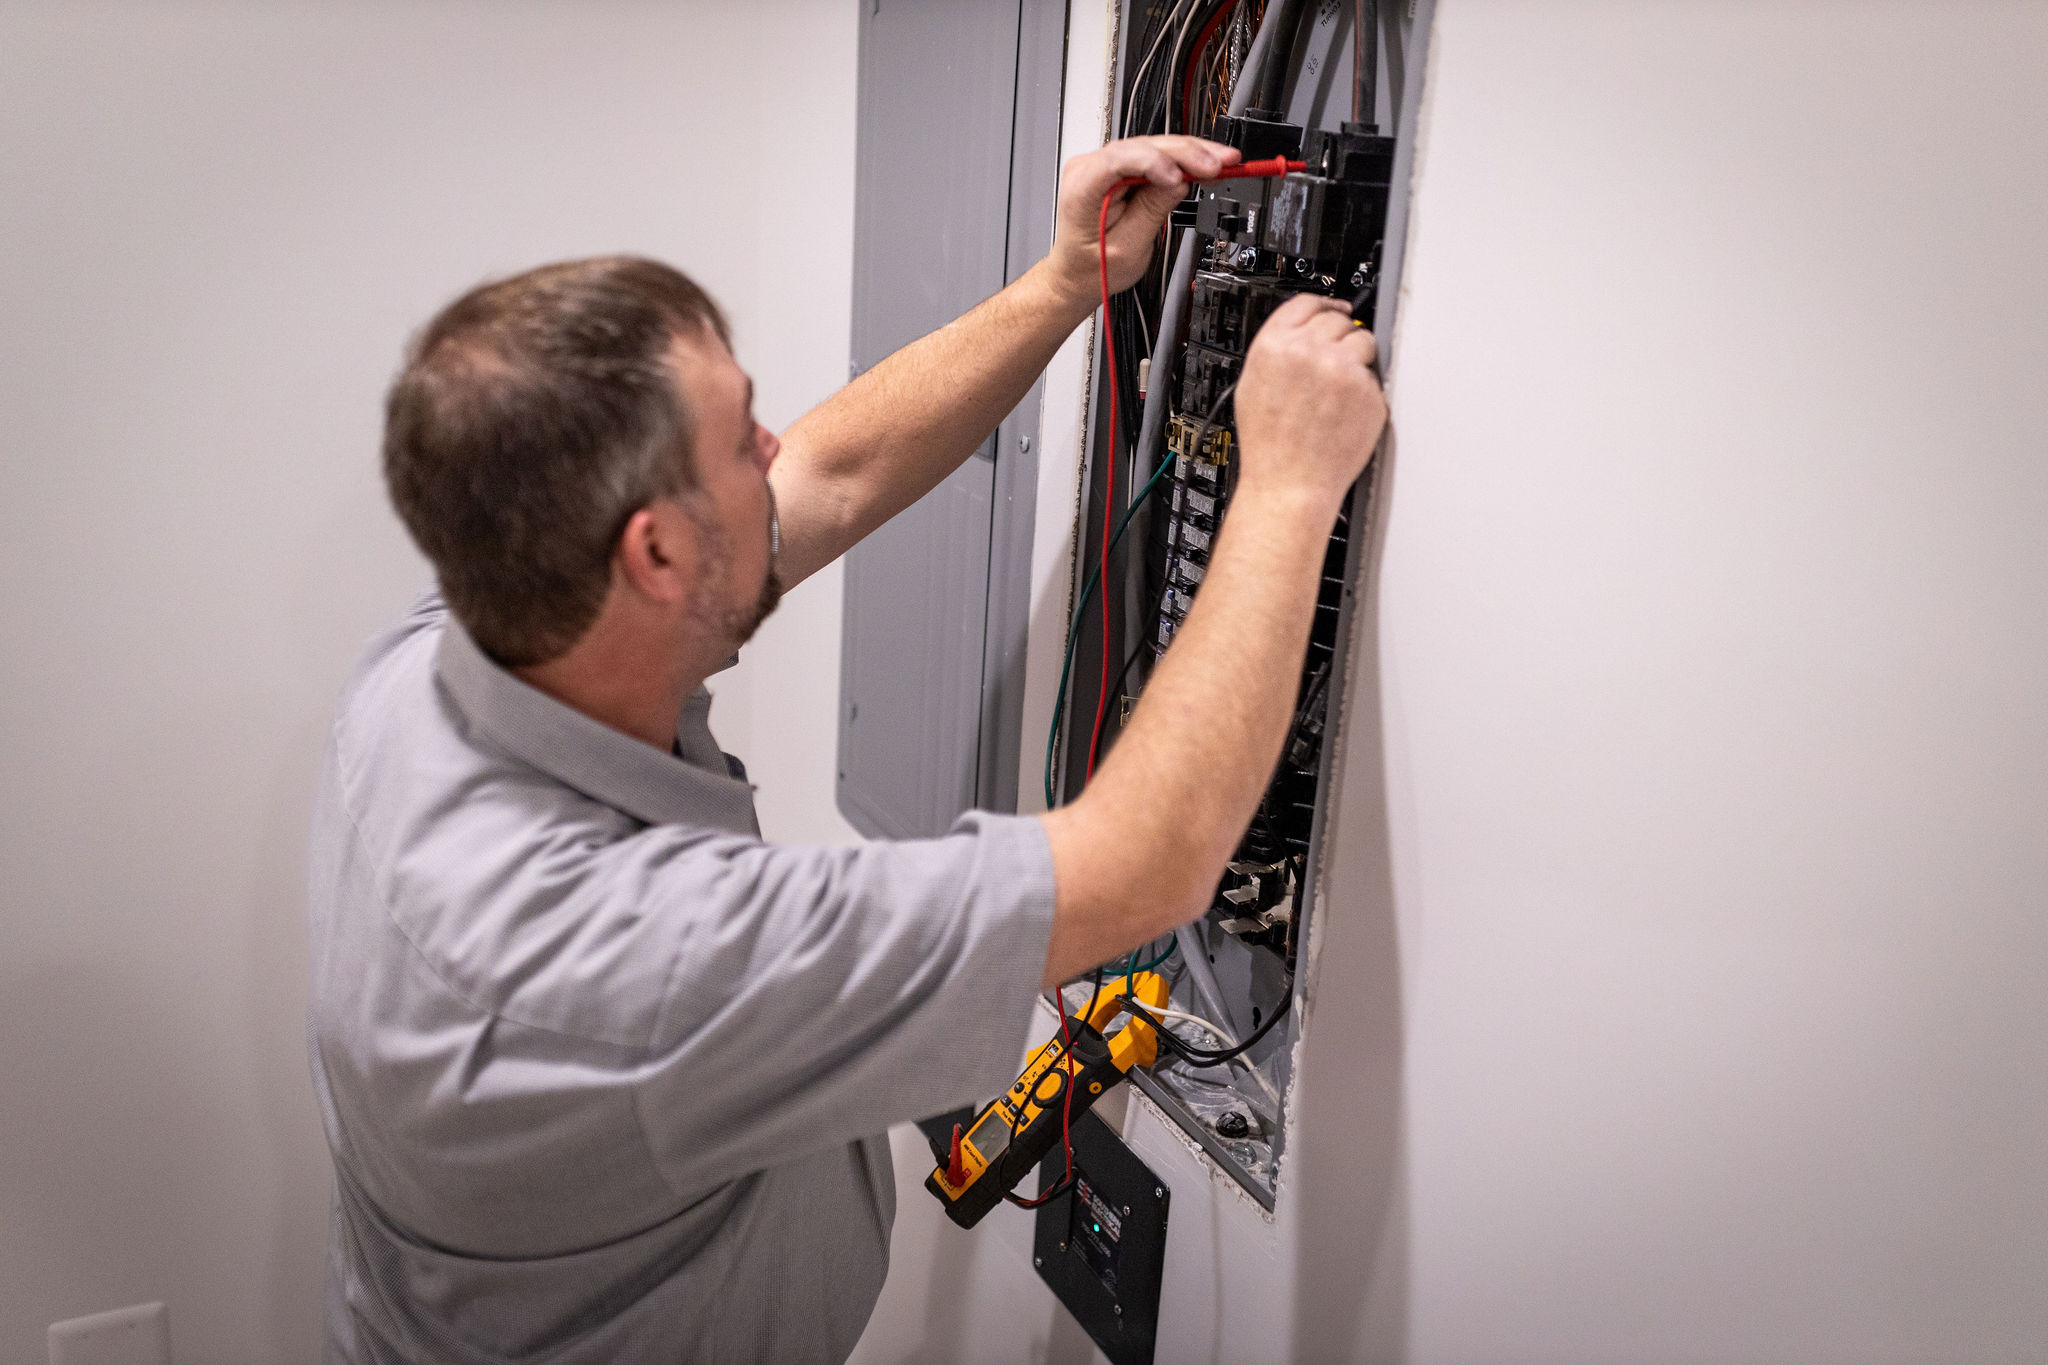 Loudoun County Electricians , Electrical services in Ashburn